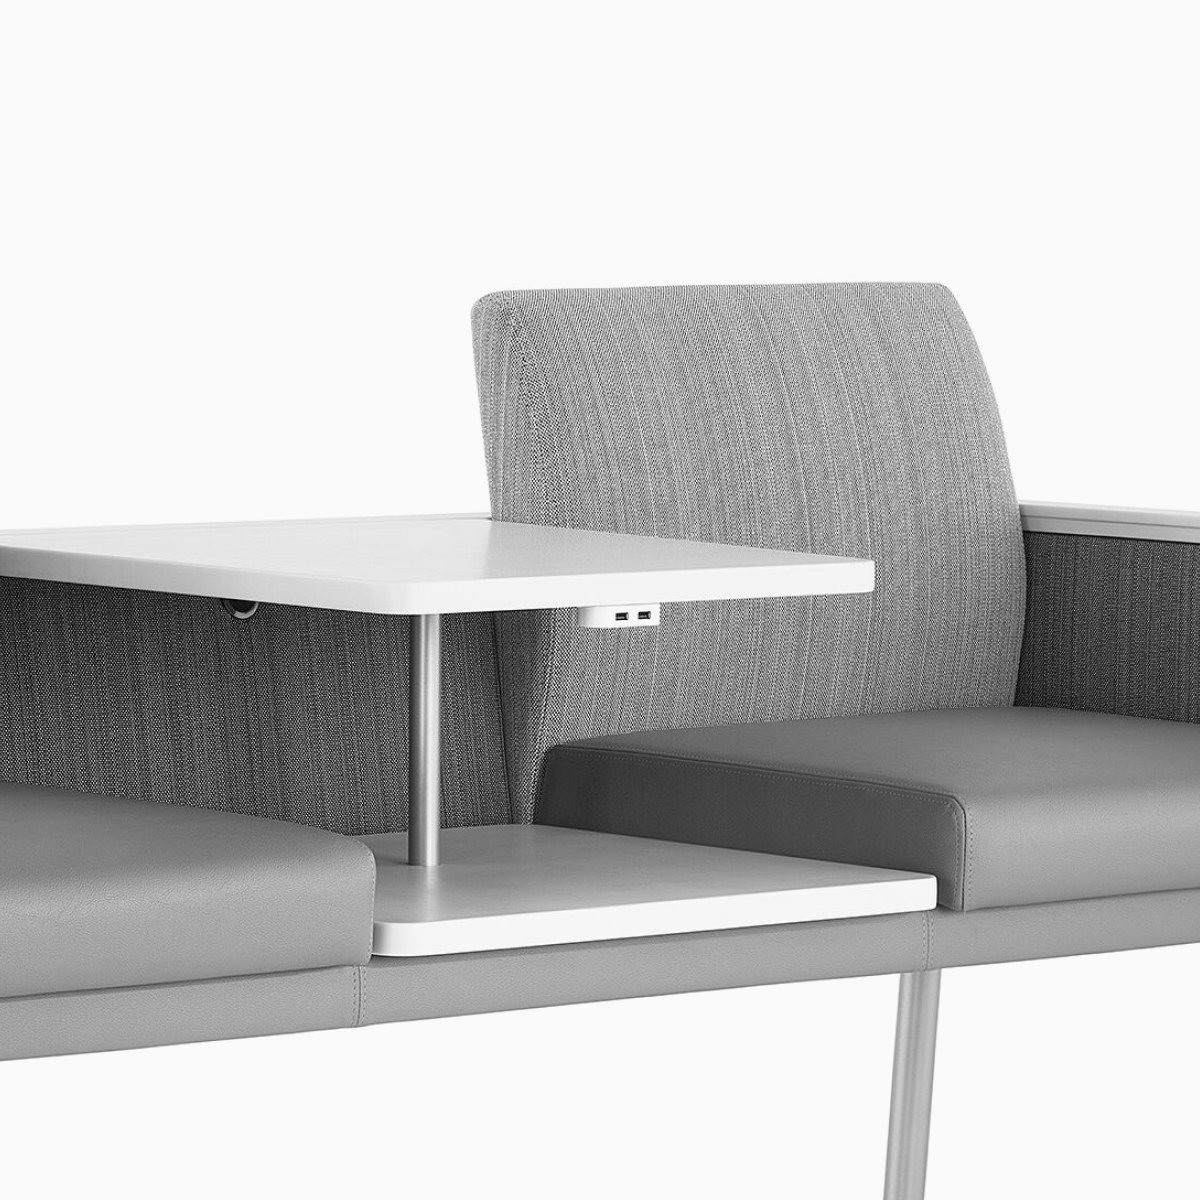 Nemschoff Palisade Easy Access Multiple Seating with a cropped view of the center table and one seat.